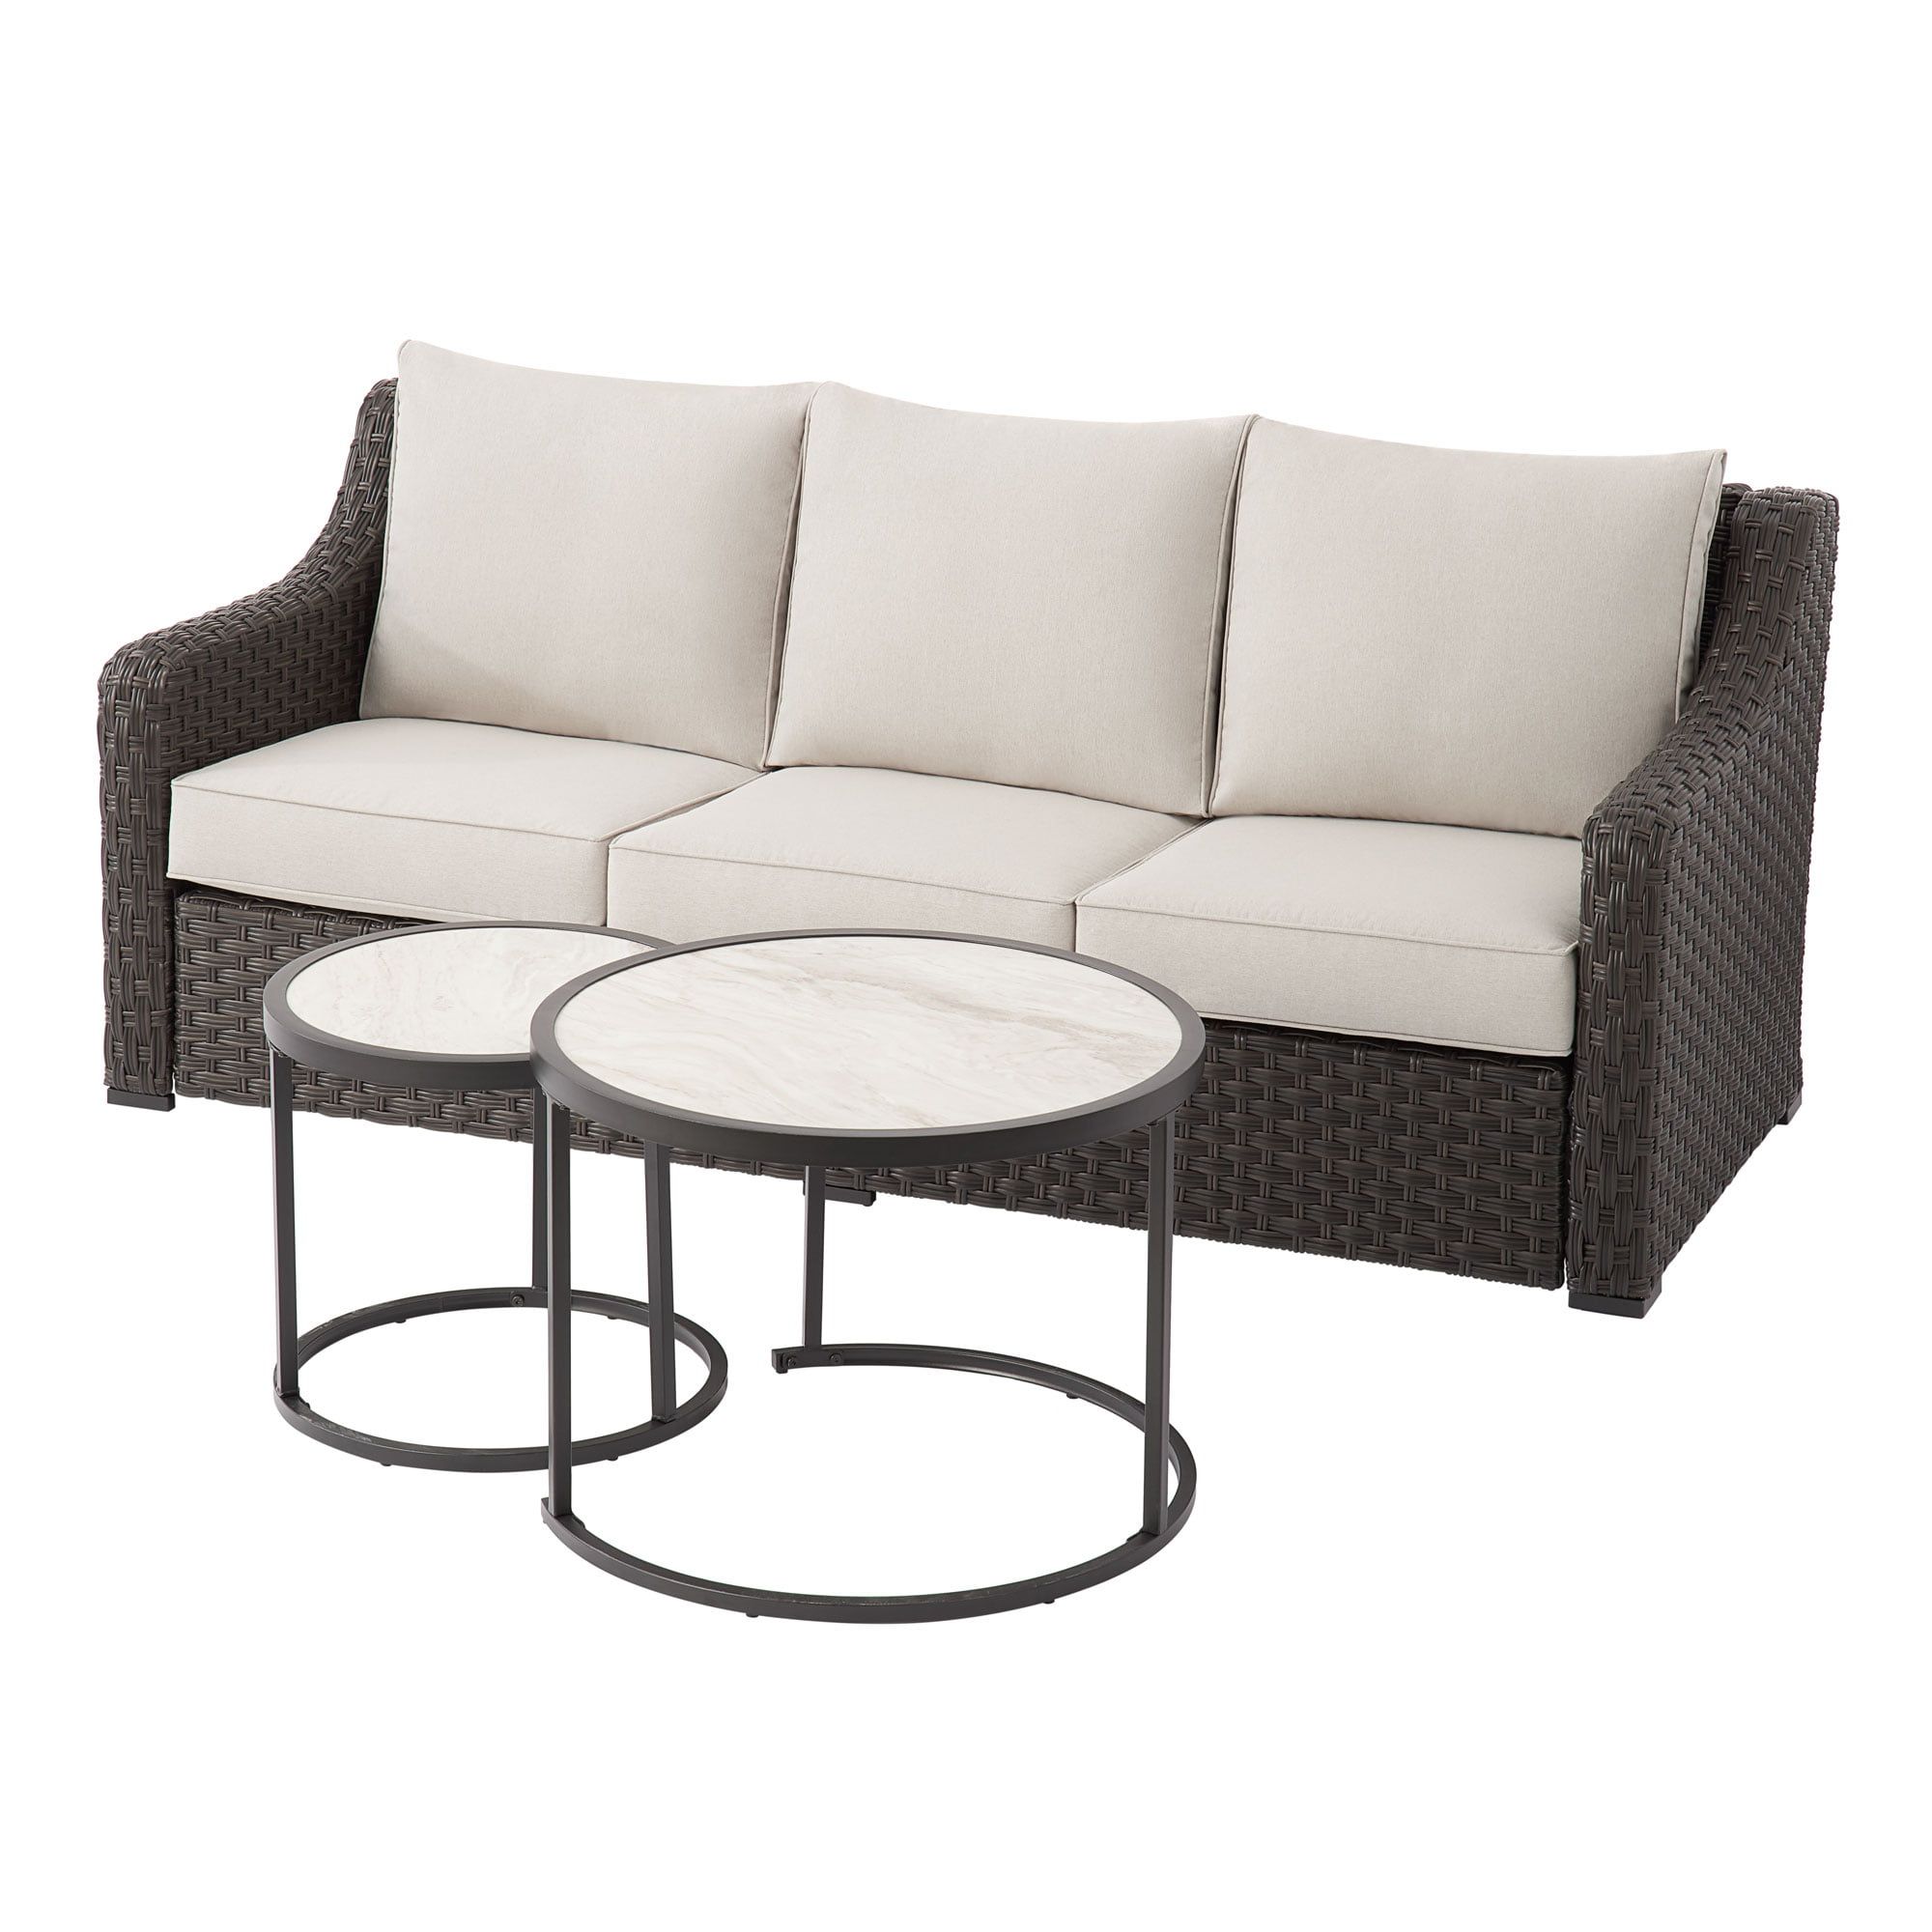 Better Homes & Gardens River Oaks 3 Piece Sofa And Nesting Tables With  Patio Cover, Dark – Walmart Pertaining To 3 Piece Sofa &amp; Nesting Table Set (Photo 7 of 15)